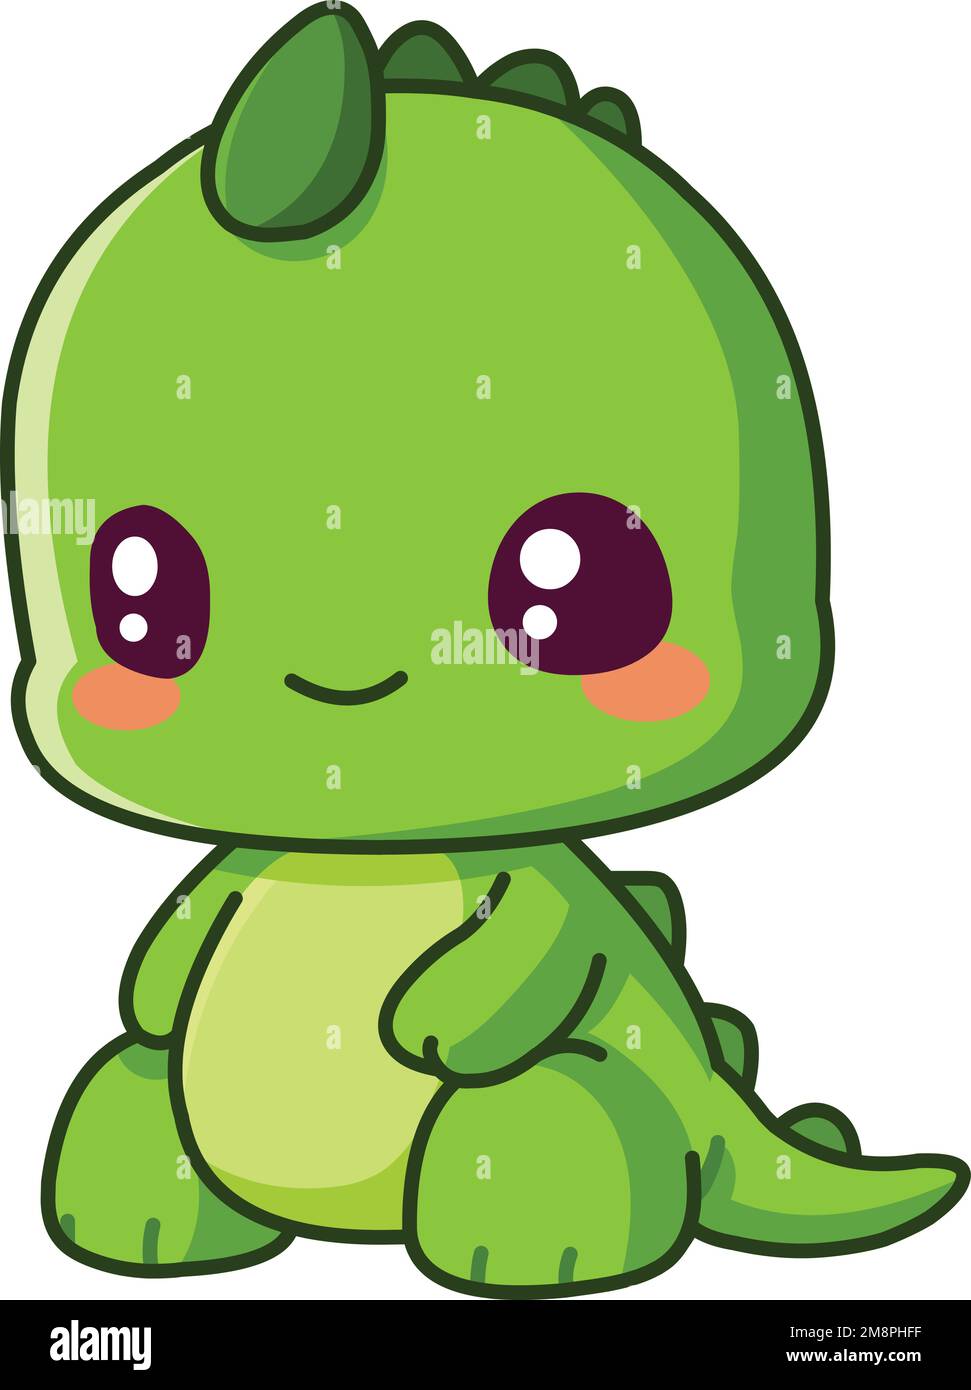 Smiling green baby dino dinosaur sitting in a chibi style Stock Vector